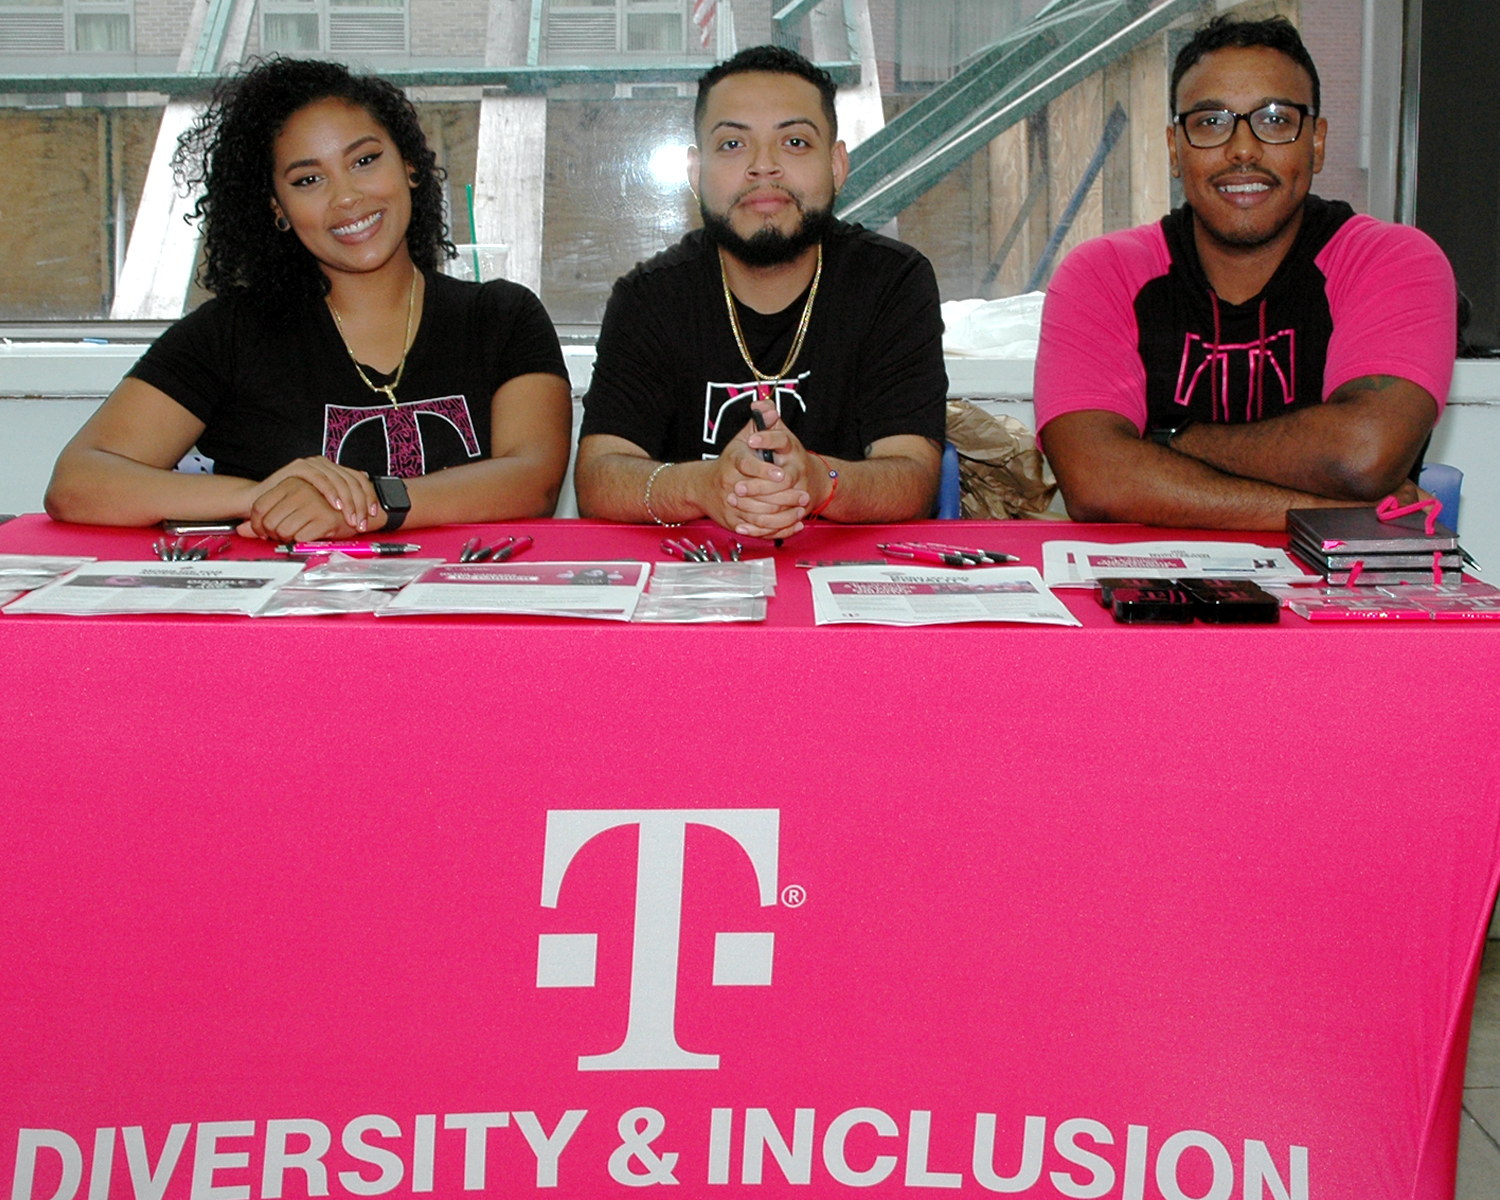 Three interviewers from T-Mobile